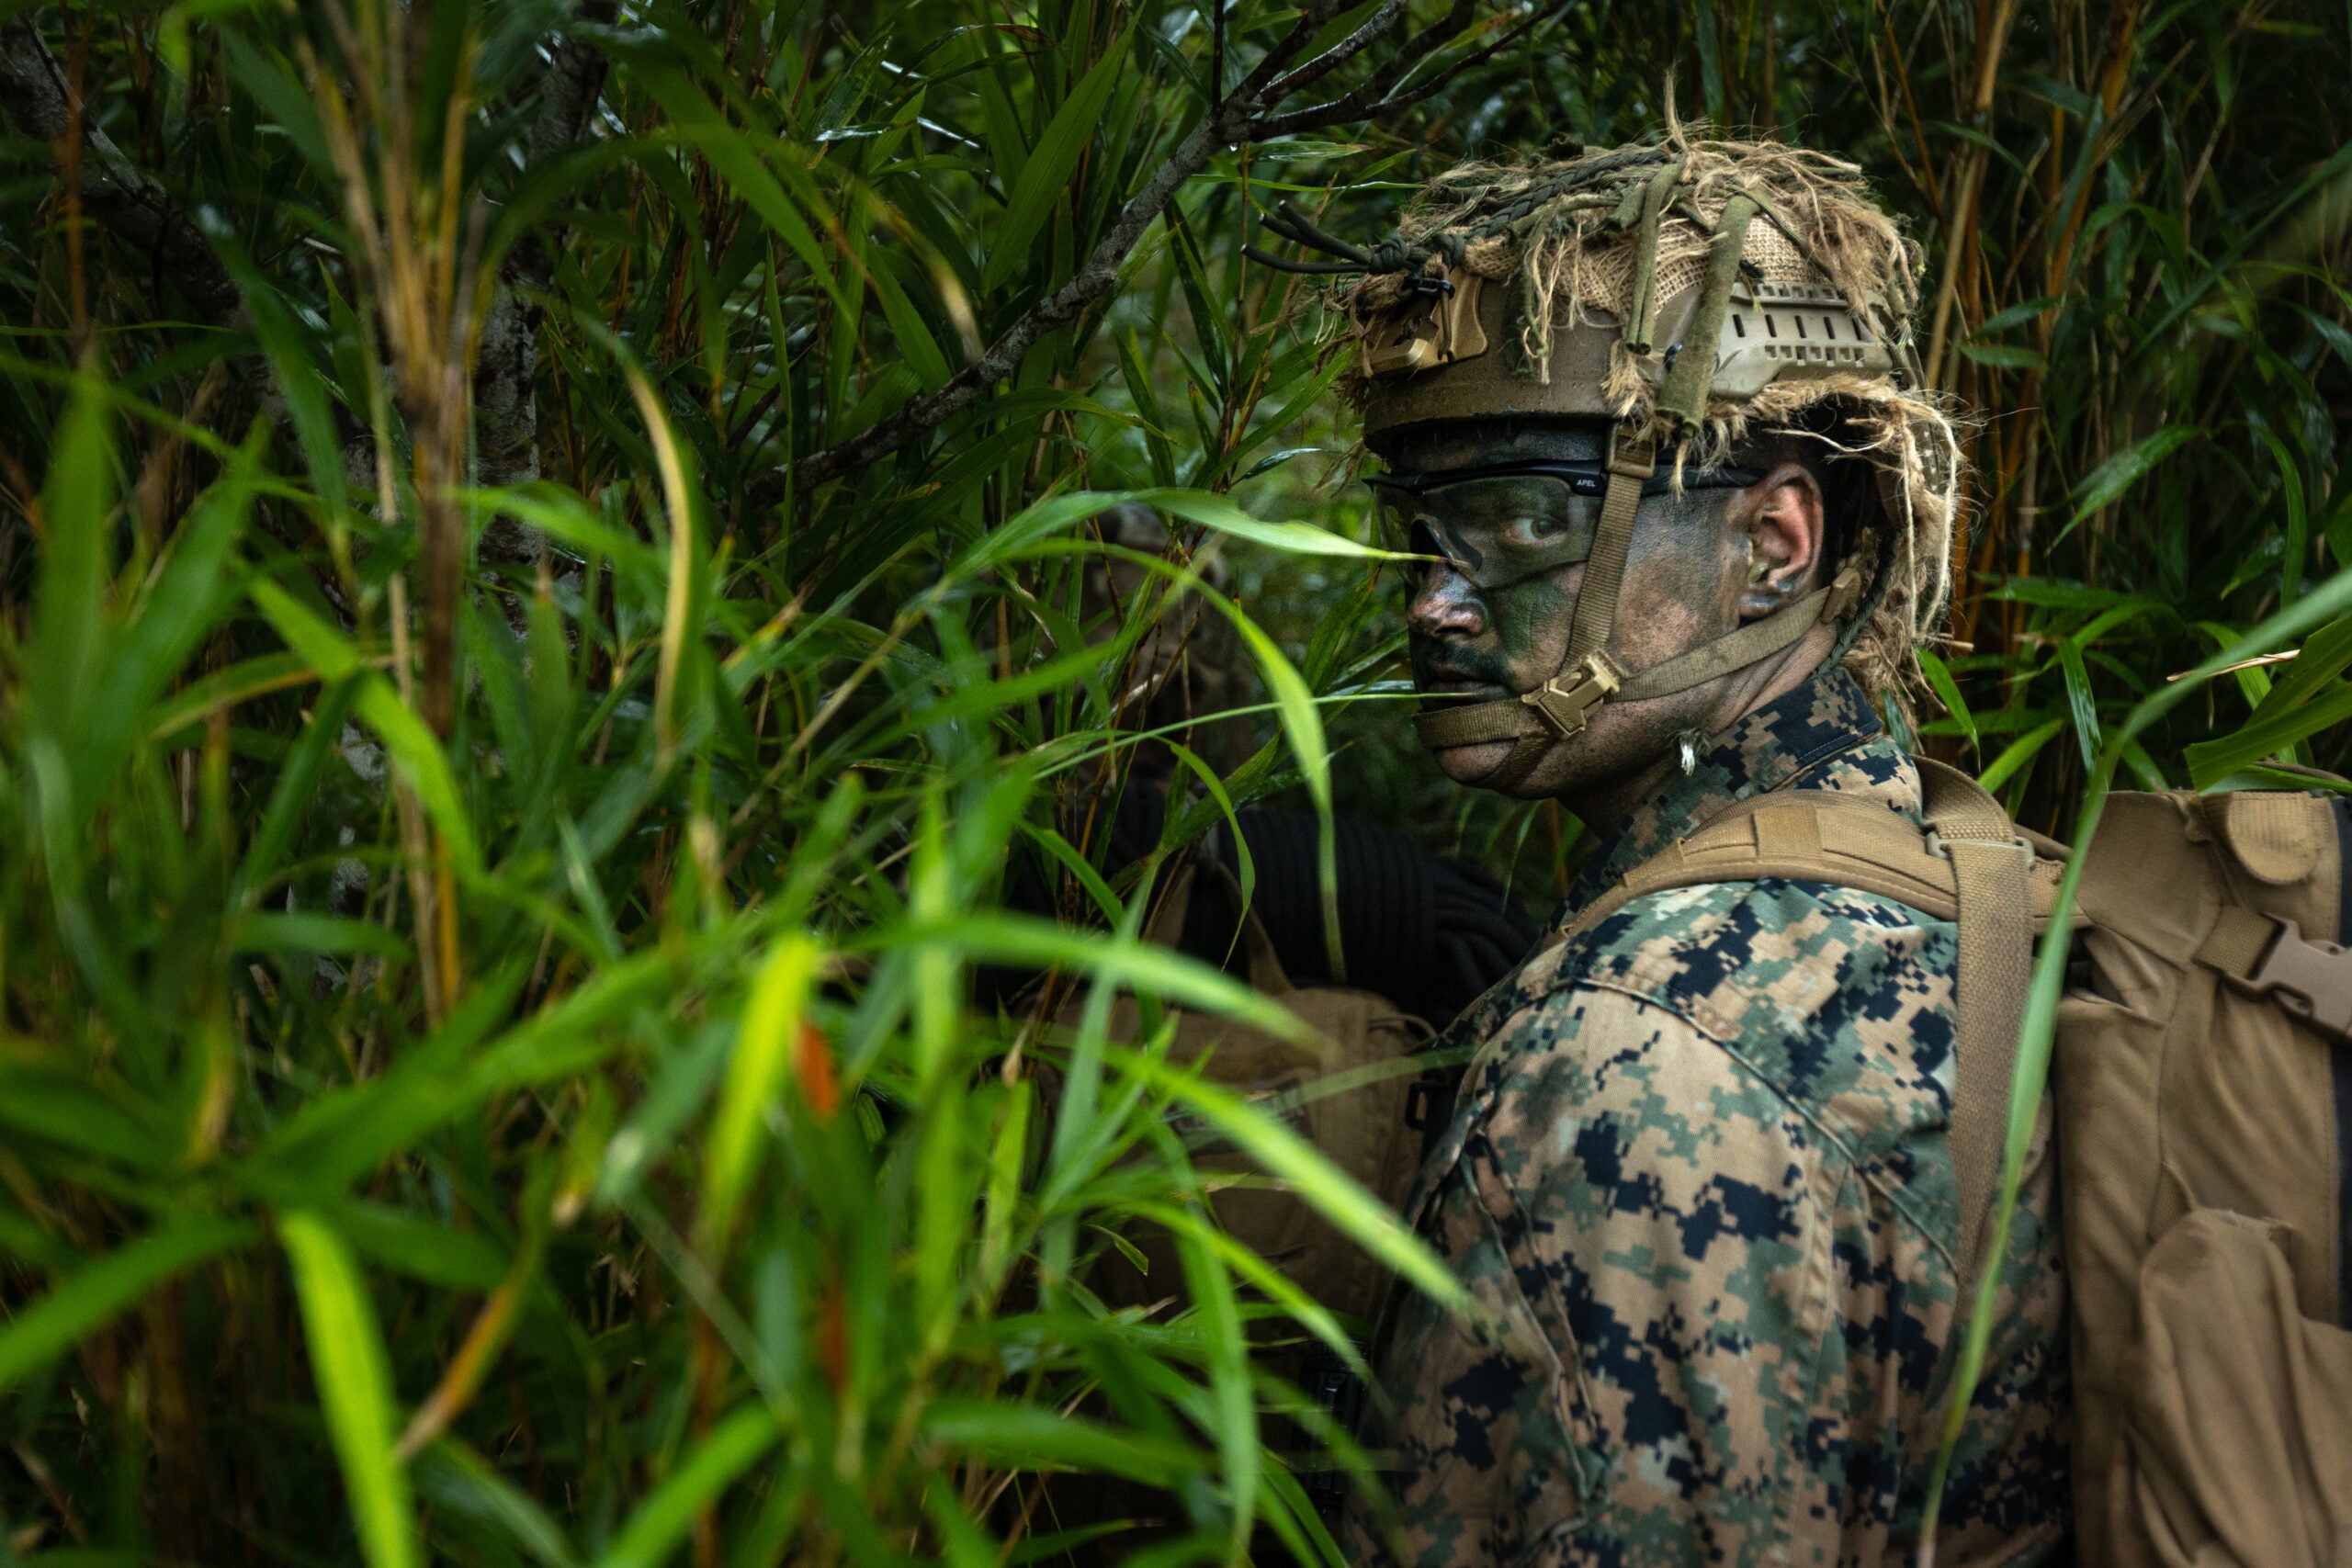 U.S. Marine Corps Lance Cpl. Austin White, a rifleman with 3d Battalion, 2d Marines, patrols during Counter Assault Exercise on Okinawa, Japan, May 11, 2022. During this force-on-force exercise, an infantry company with 3/2 rapidly deployed into the double-canopy jungles of the Northern Training Area to defend against an assault from another infantry company with 1st Battalion, 3d Marines. This exercise was designed to increase 3d Marine Division’s ability to seize and defend key maritime terrain, such as islands or coastal areas, and conduct Expeditionary Advanced Base Operations in the western Pacific. 3/2 is deployed under 4th Marines, 3d Marine Division as part of the Unit Deployment Program. (U.S. Marine Corps photo by Sgt. Micha Pierce)